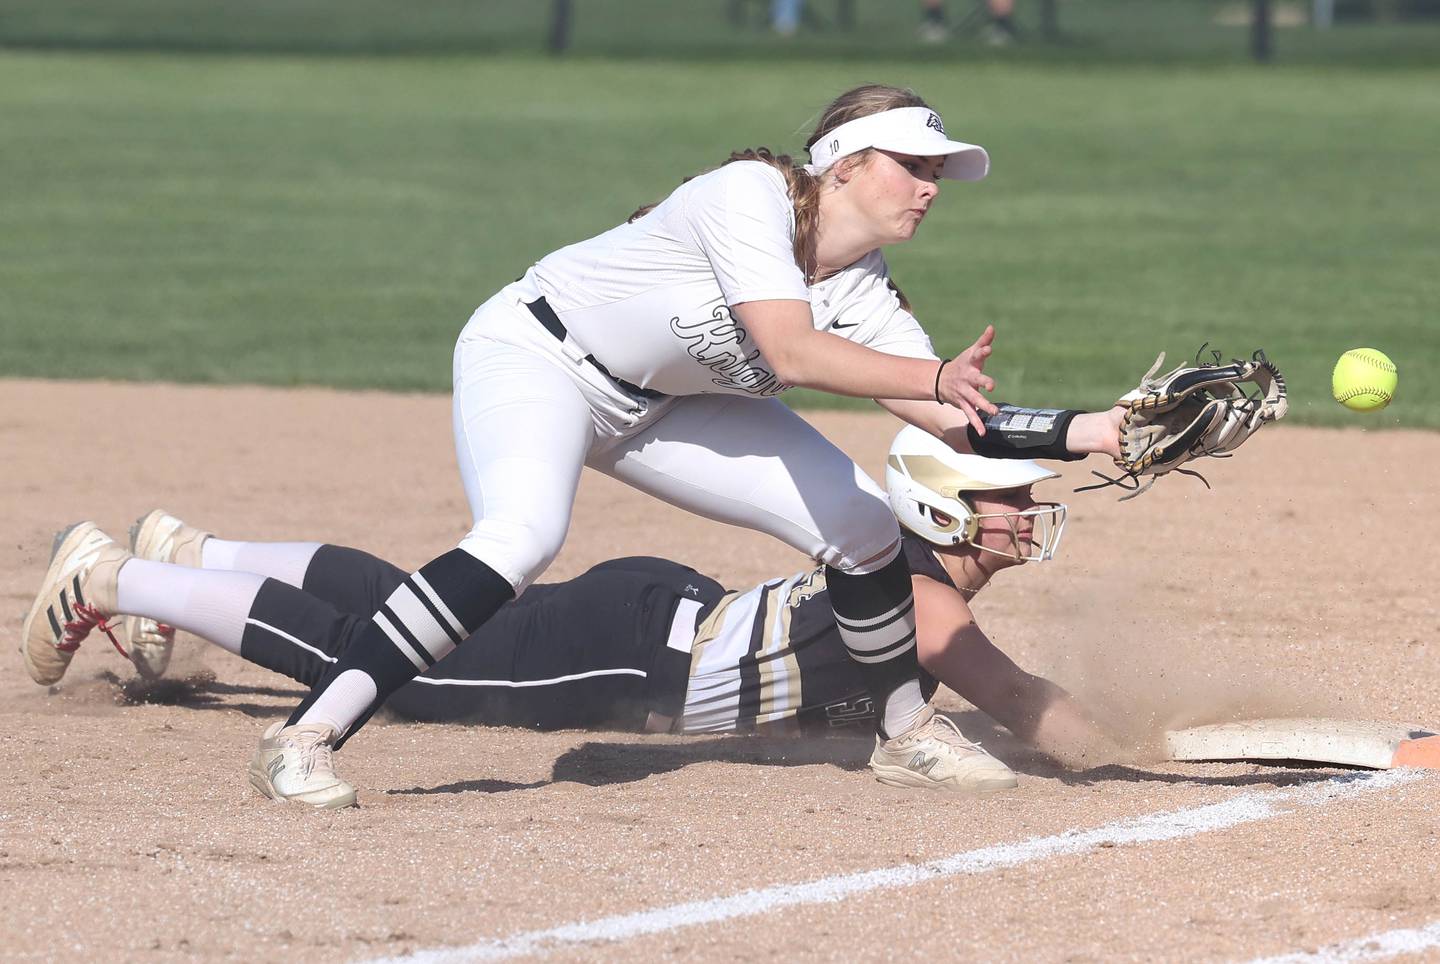 The ball gets by Kaneland's Emily Olp as they try to pick off Sycamore's Kairi Lantz Friday, April 28, 2023, during their game at Sycamore High School. Lantz advanced to second on the play.